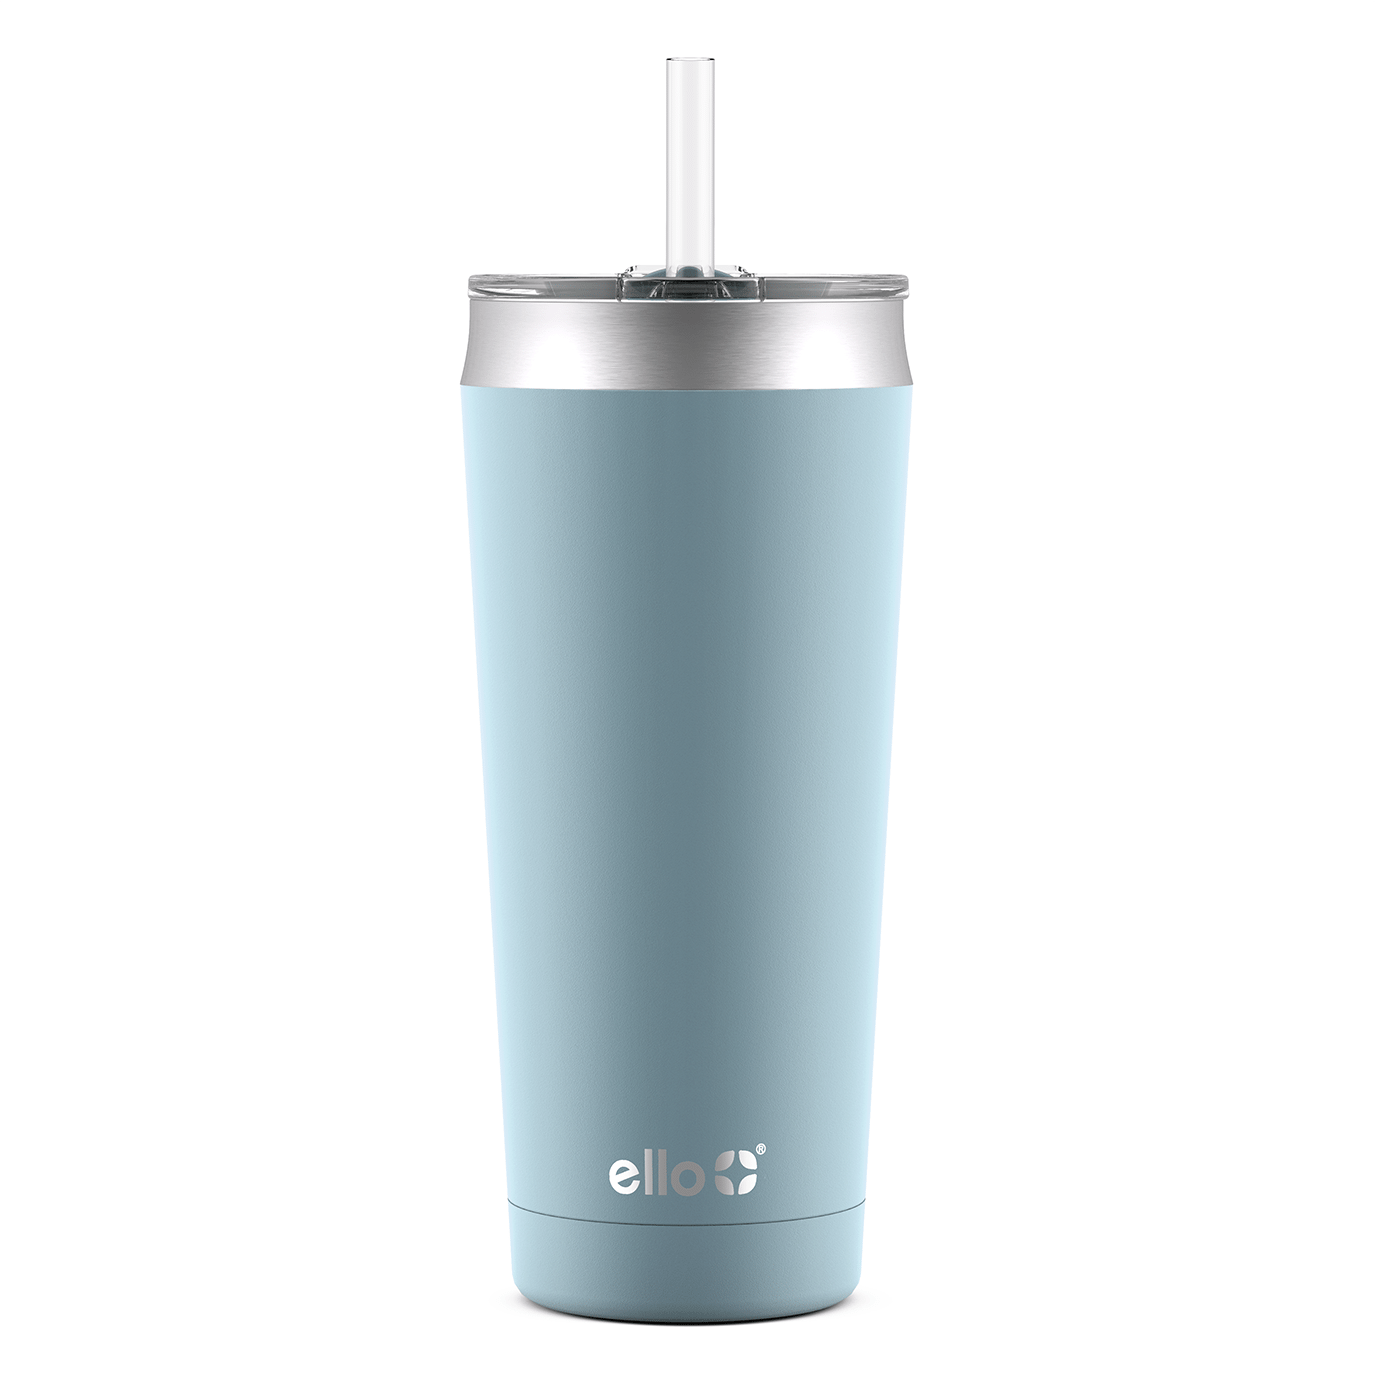 Cup Mug Bottle Tumbler Stainless Steel Vacuum Flask Thermos Hot Cold D